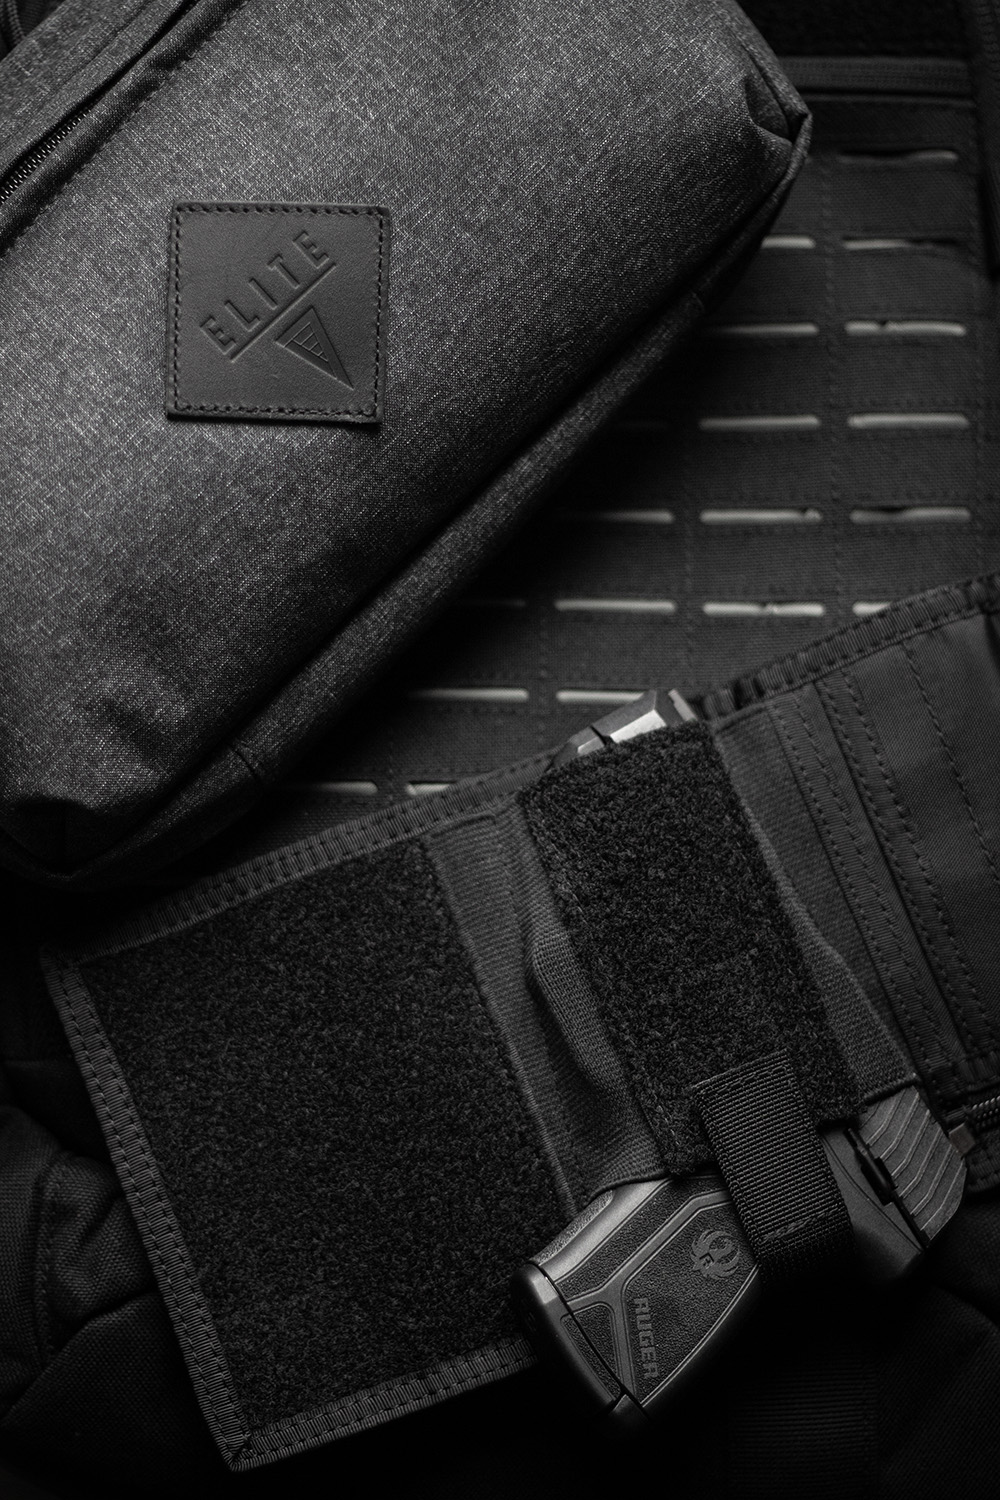 Elite Survival Systems offers a wide variety of Concealed Carry solutions to choose from.